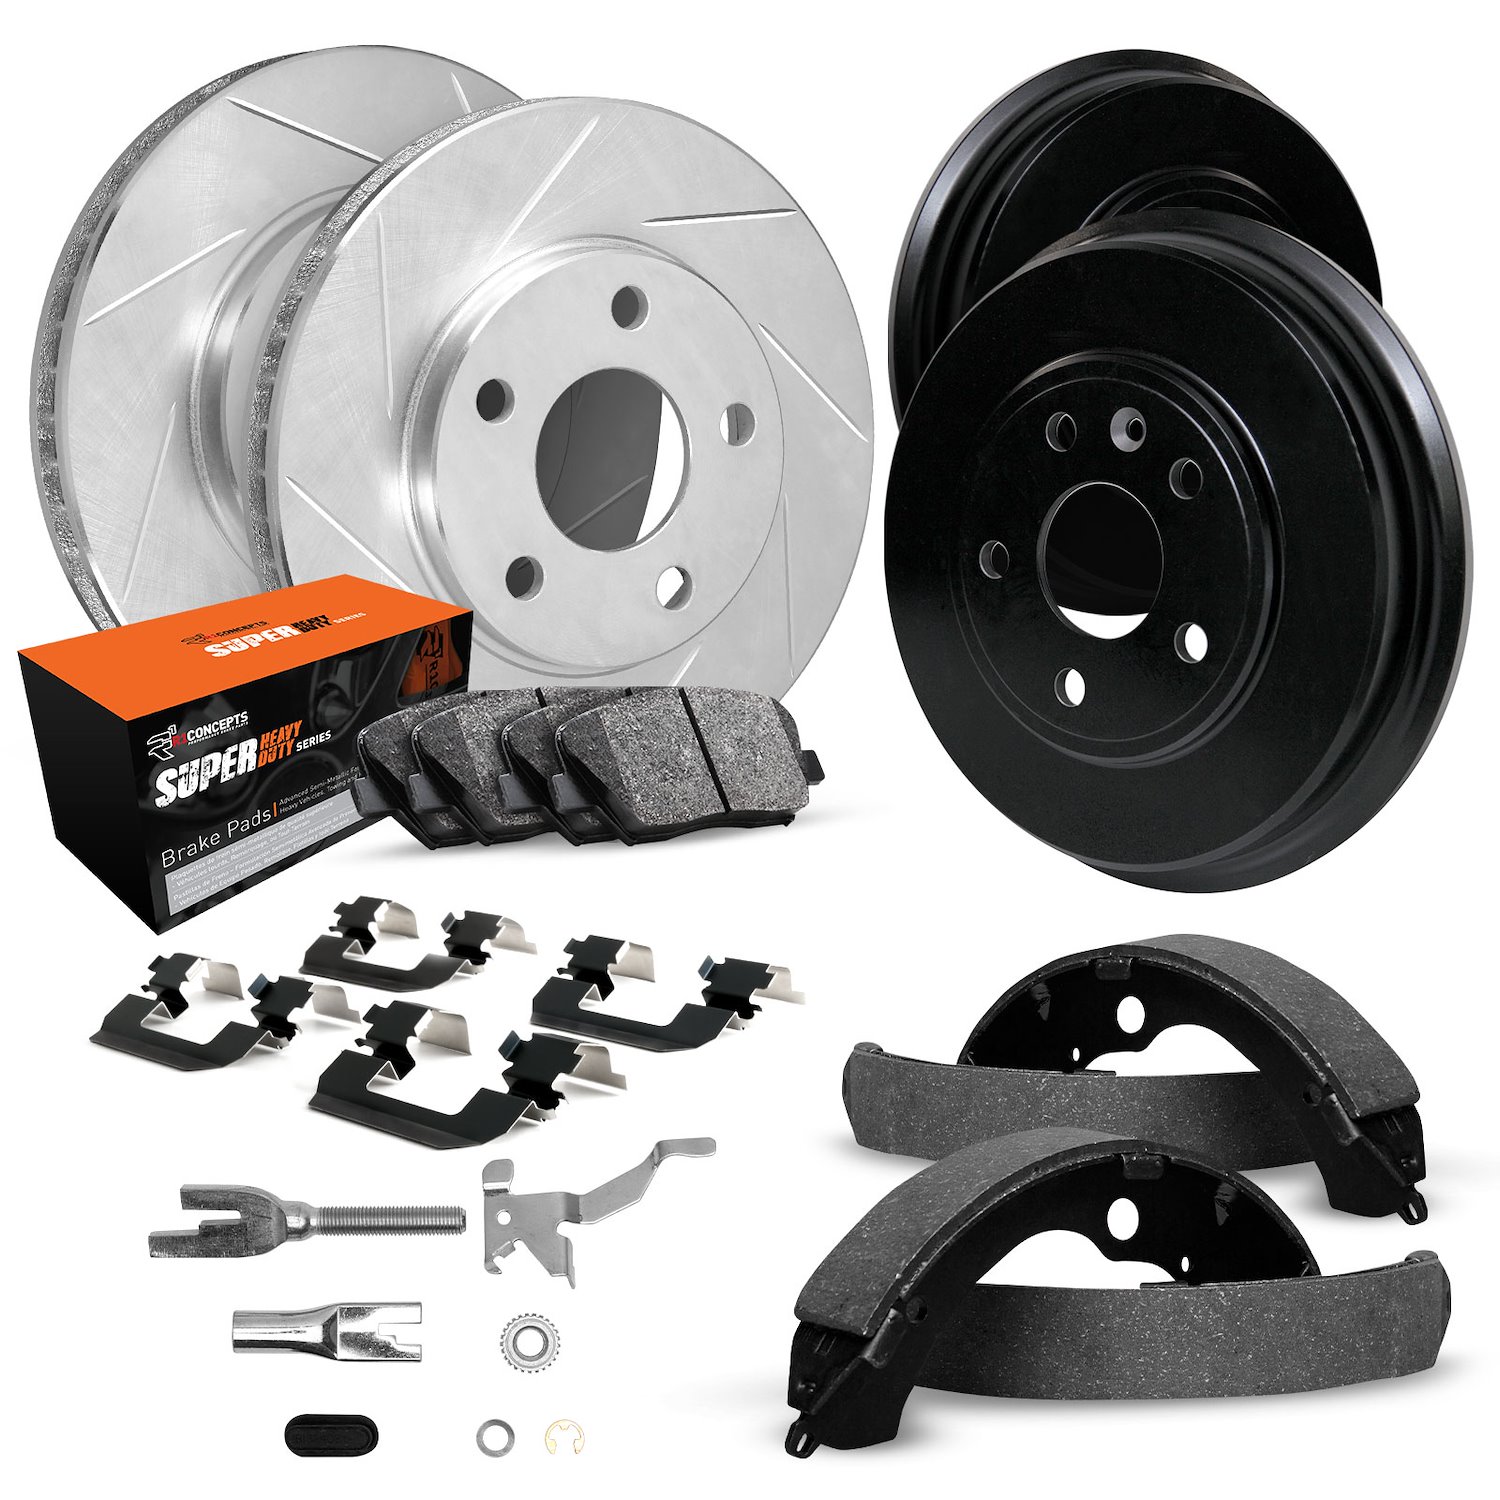 E-Line Slotted Silver Rotor & Drum Set w/Super-Duty Pads, Shoes/Hardware/Adjusters, 2005-2006 Fits Multiple Makes/Models